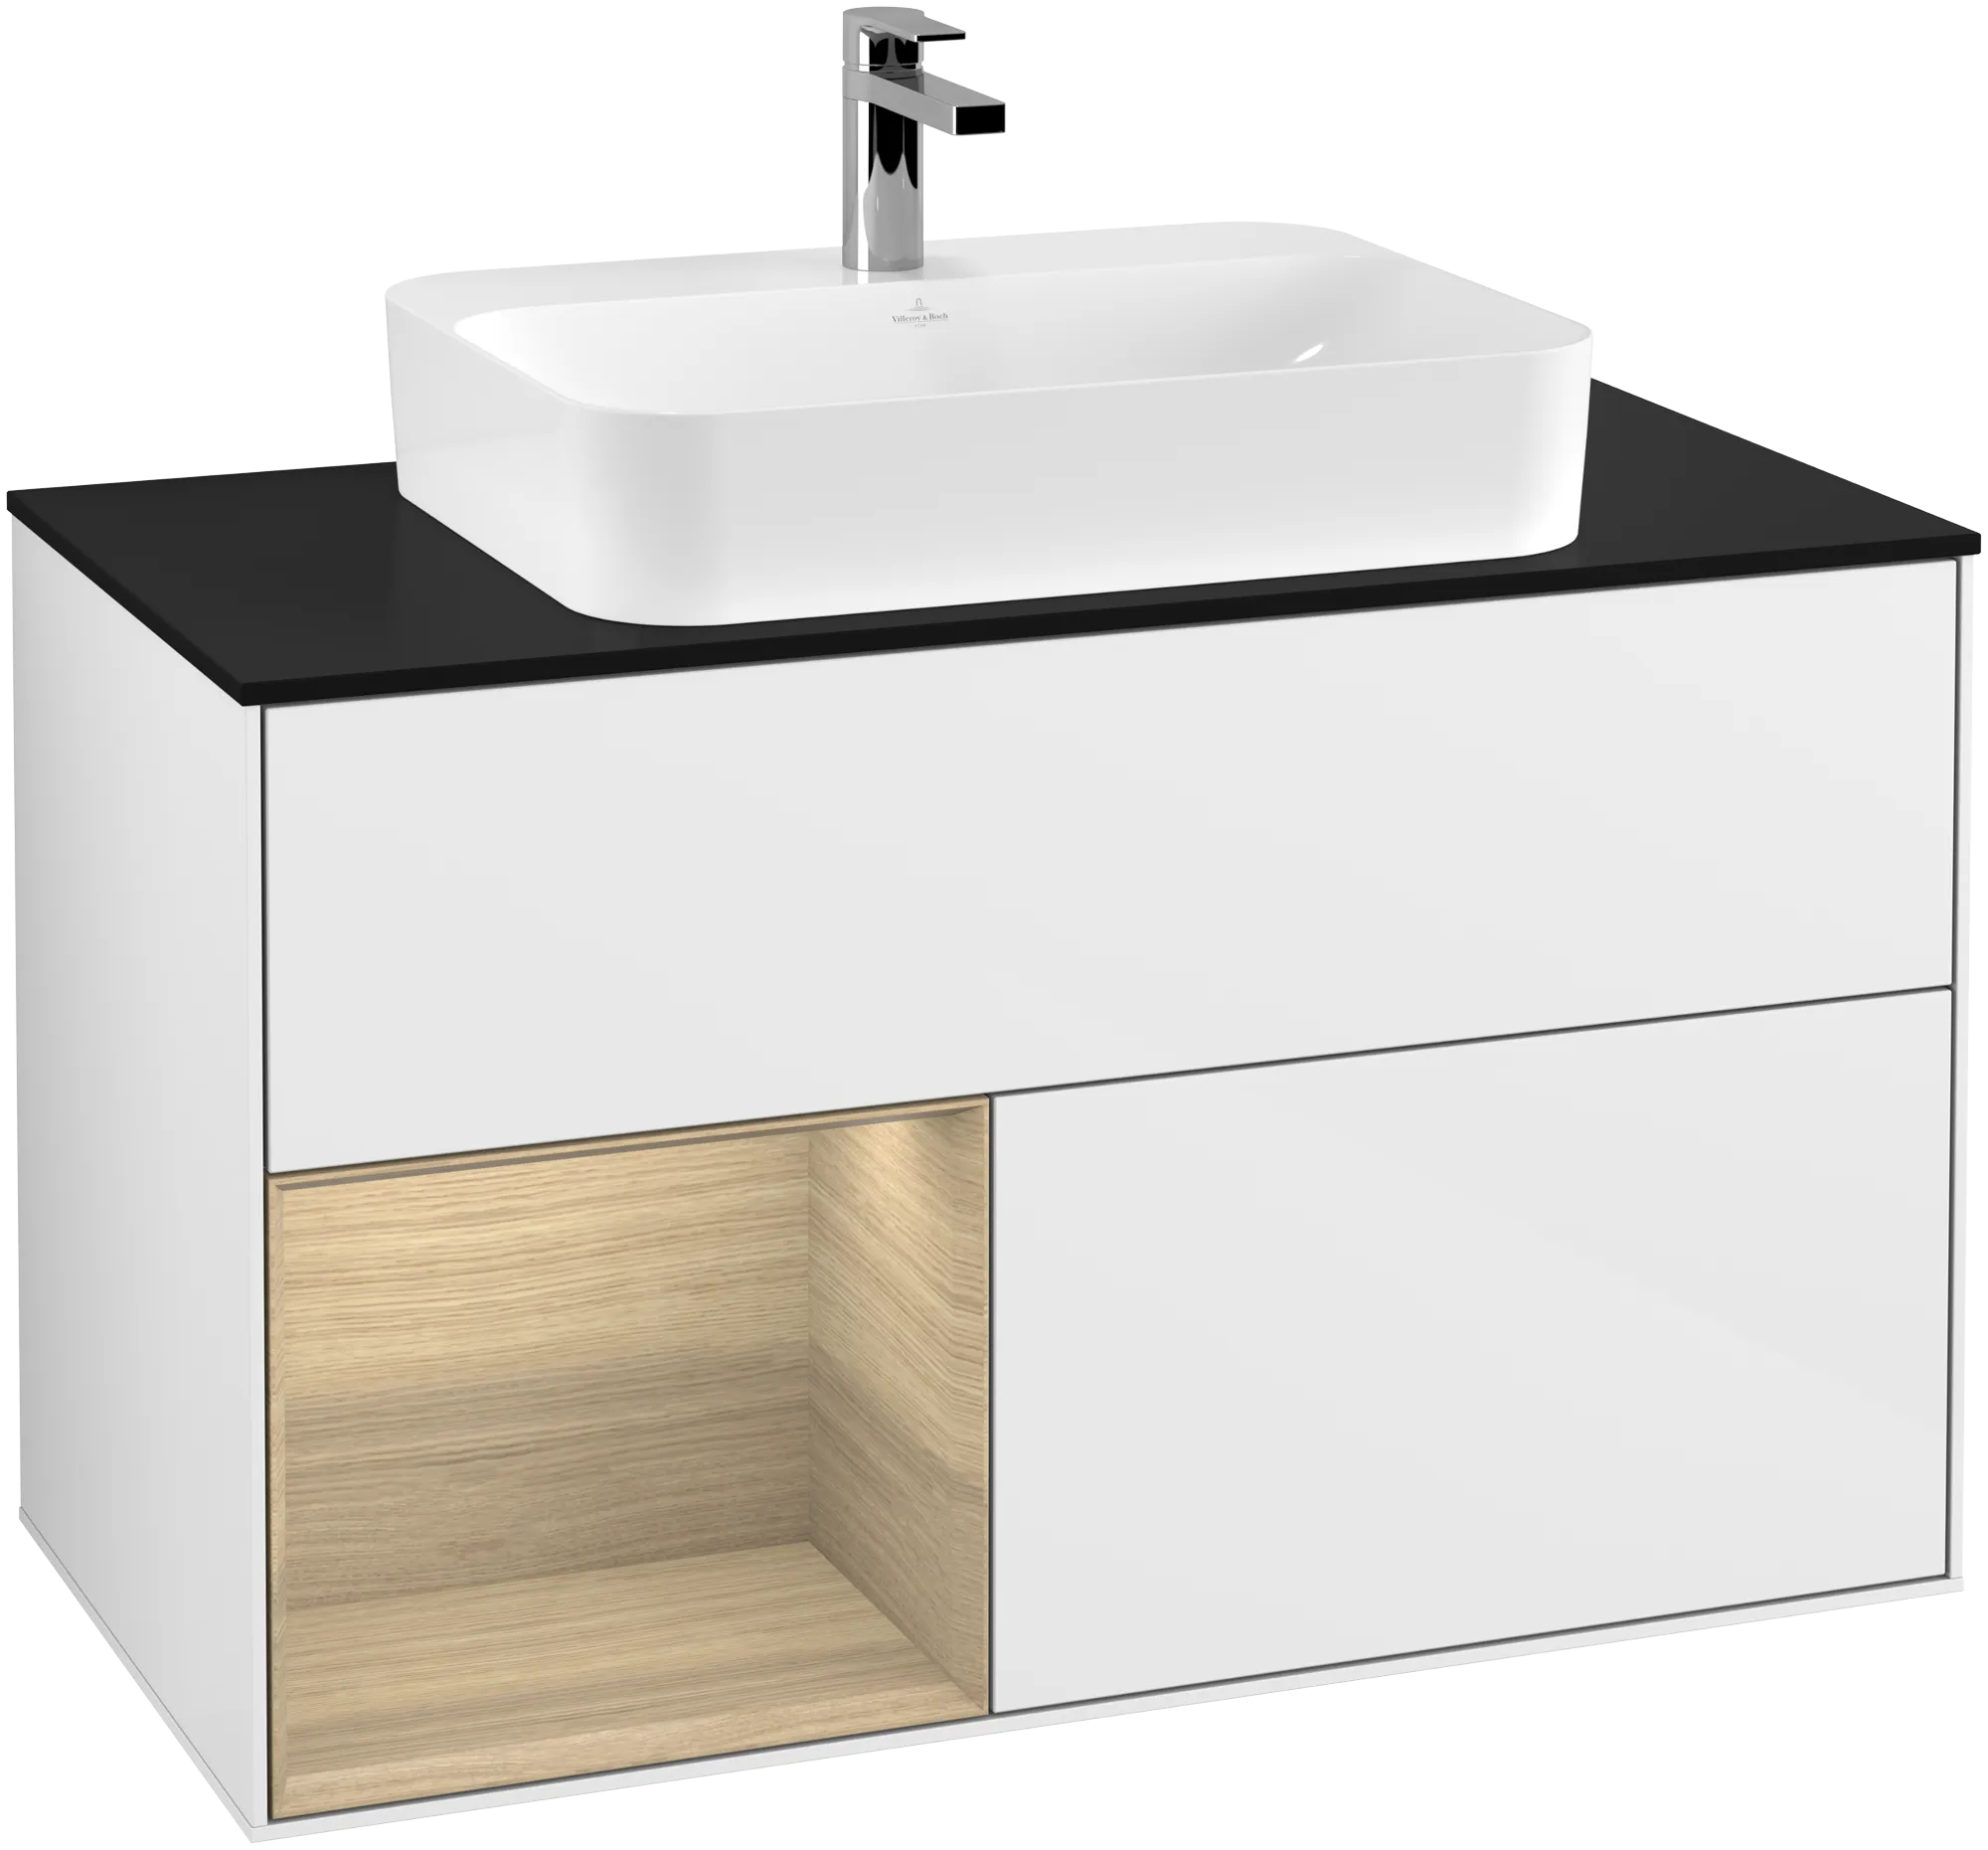 Picture of VILLEROY BOCH Finion Vanity unit, with lighting, 2 pull-out compartments, 1000 x 603 x 501 mm, Glossy White Lacquer / Oak Veneer / Glass Black Matt #G362PCGF